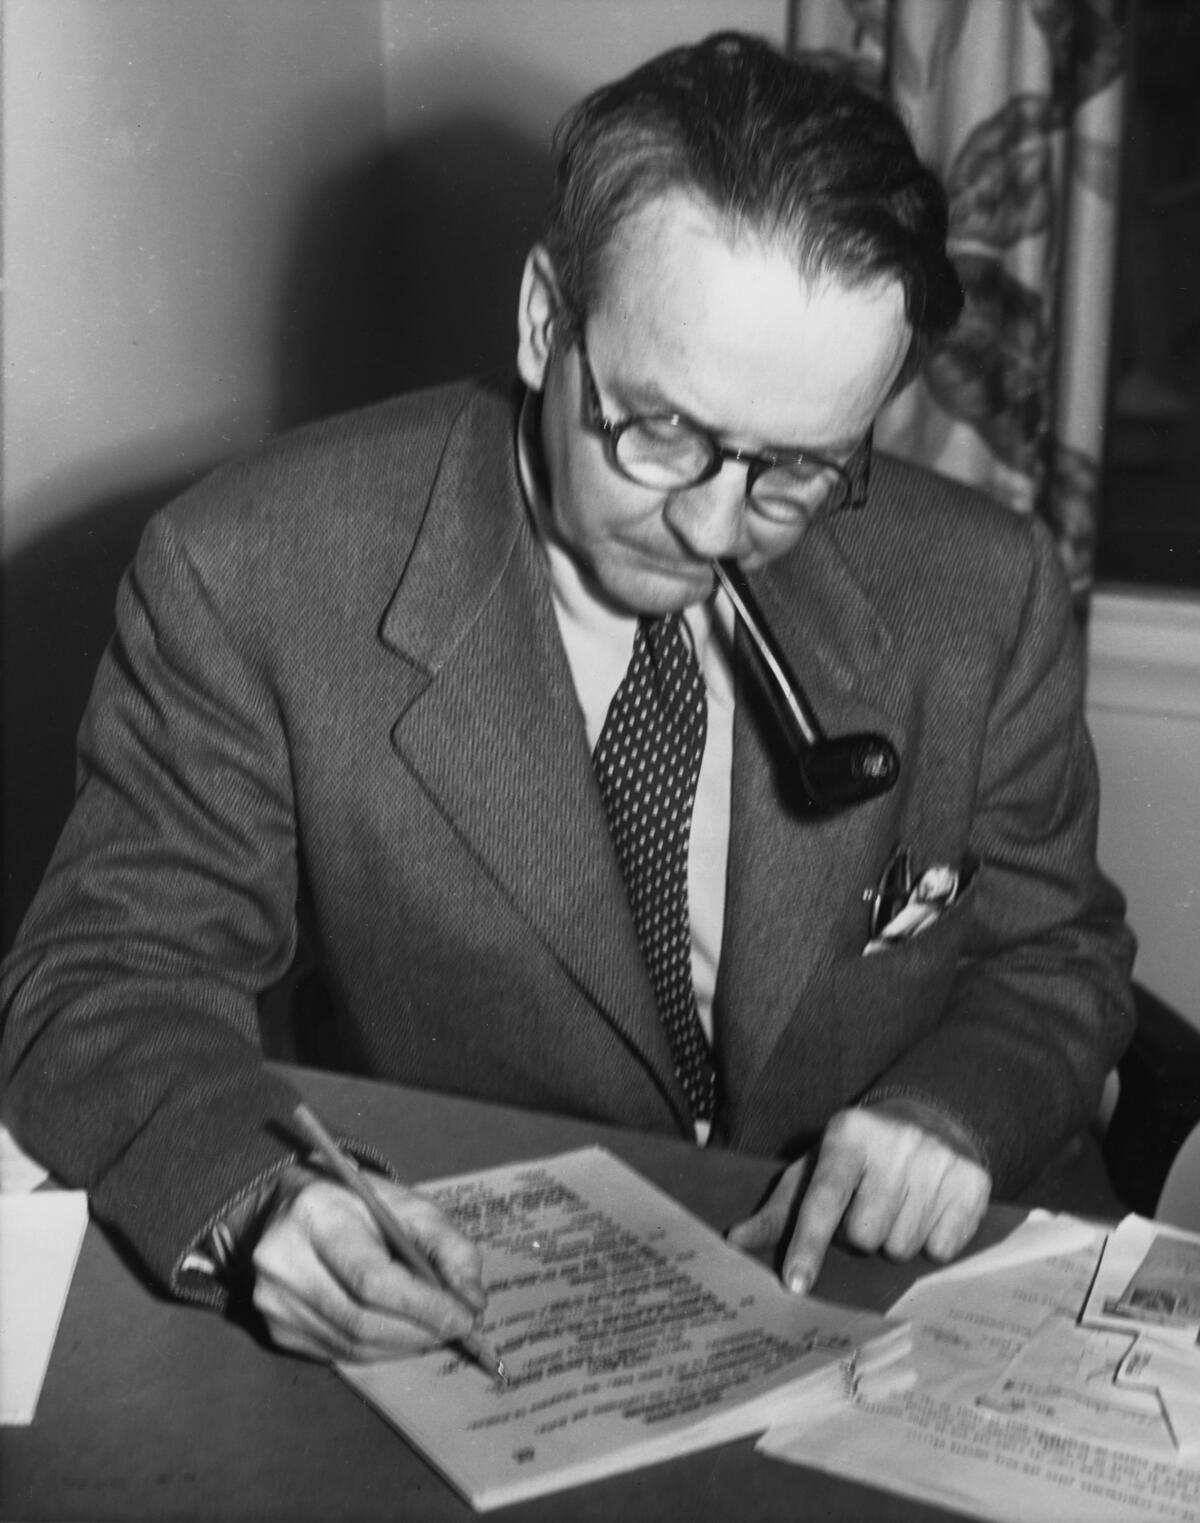 A man in a suit and tie, with a pipe in his mouth, looks down at what he's writing 